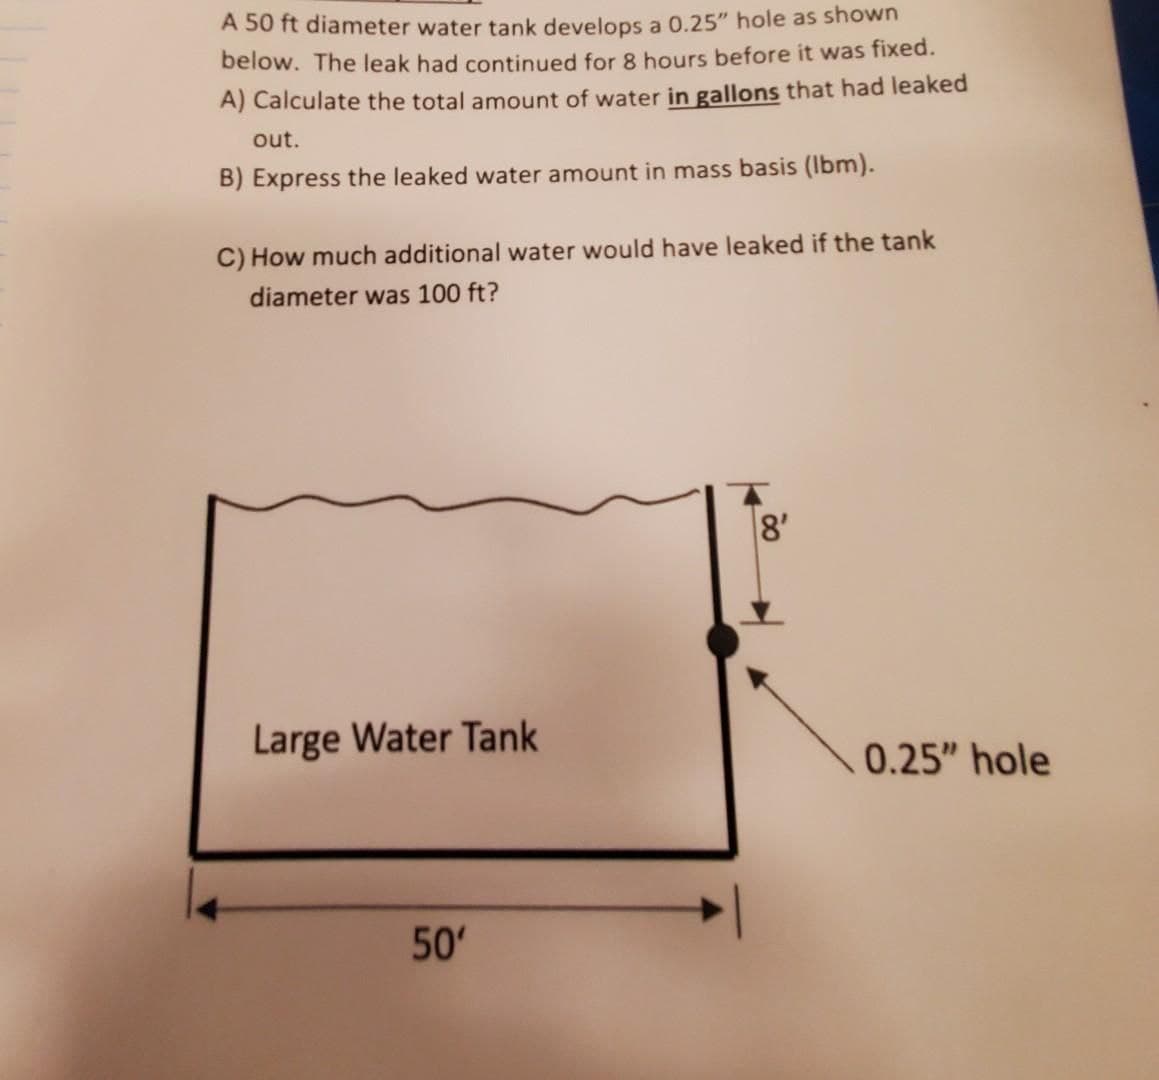 A 50 ft diameter water tank develops a 0.25" hole as shown
below. The leak had continued for 8 hours before it was fixed.
A) Calculate the total amount of water in gallons that had leaked
out.
B) Express the leaked water amount in mass basis (lbm).
C) How much additional water would have leaked if the tank
diameter was 100 ft?
Large Water Tank
50'
8'
0.25" hole